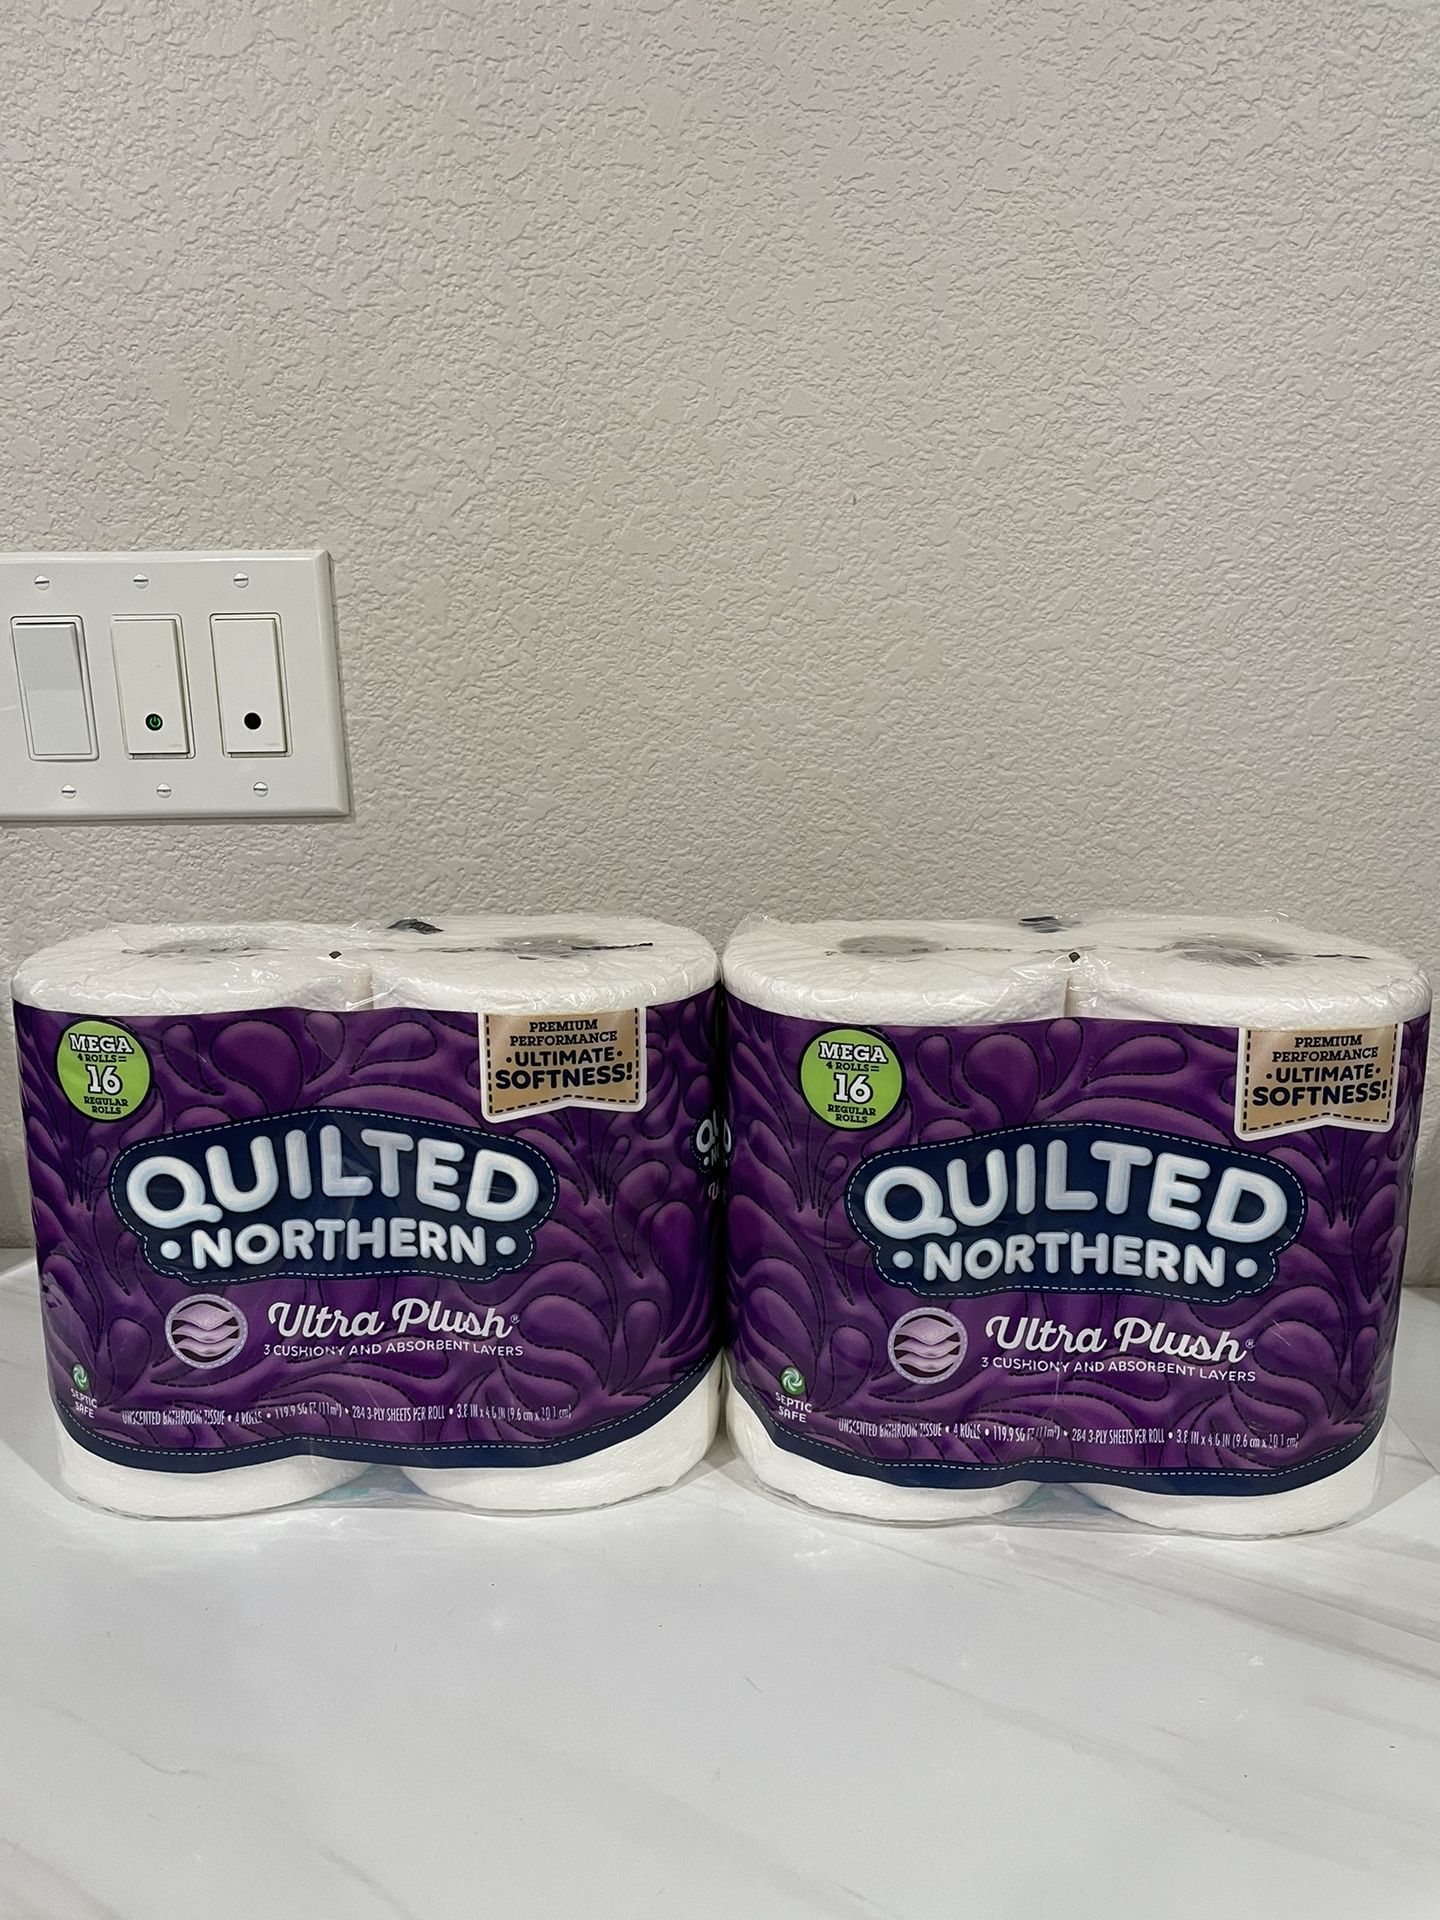 Quilted Northern Bathroom Tissue, Unscented, Mega Rolls, 3-Ply 4 ea, Shop